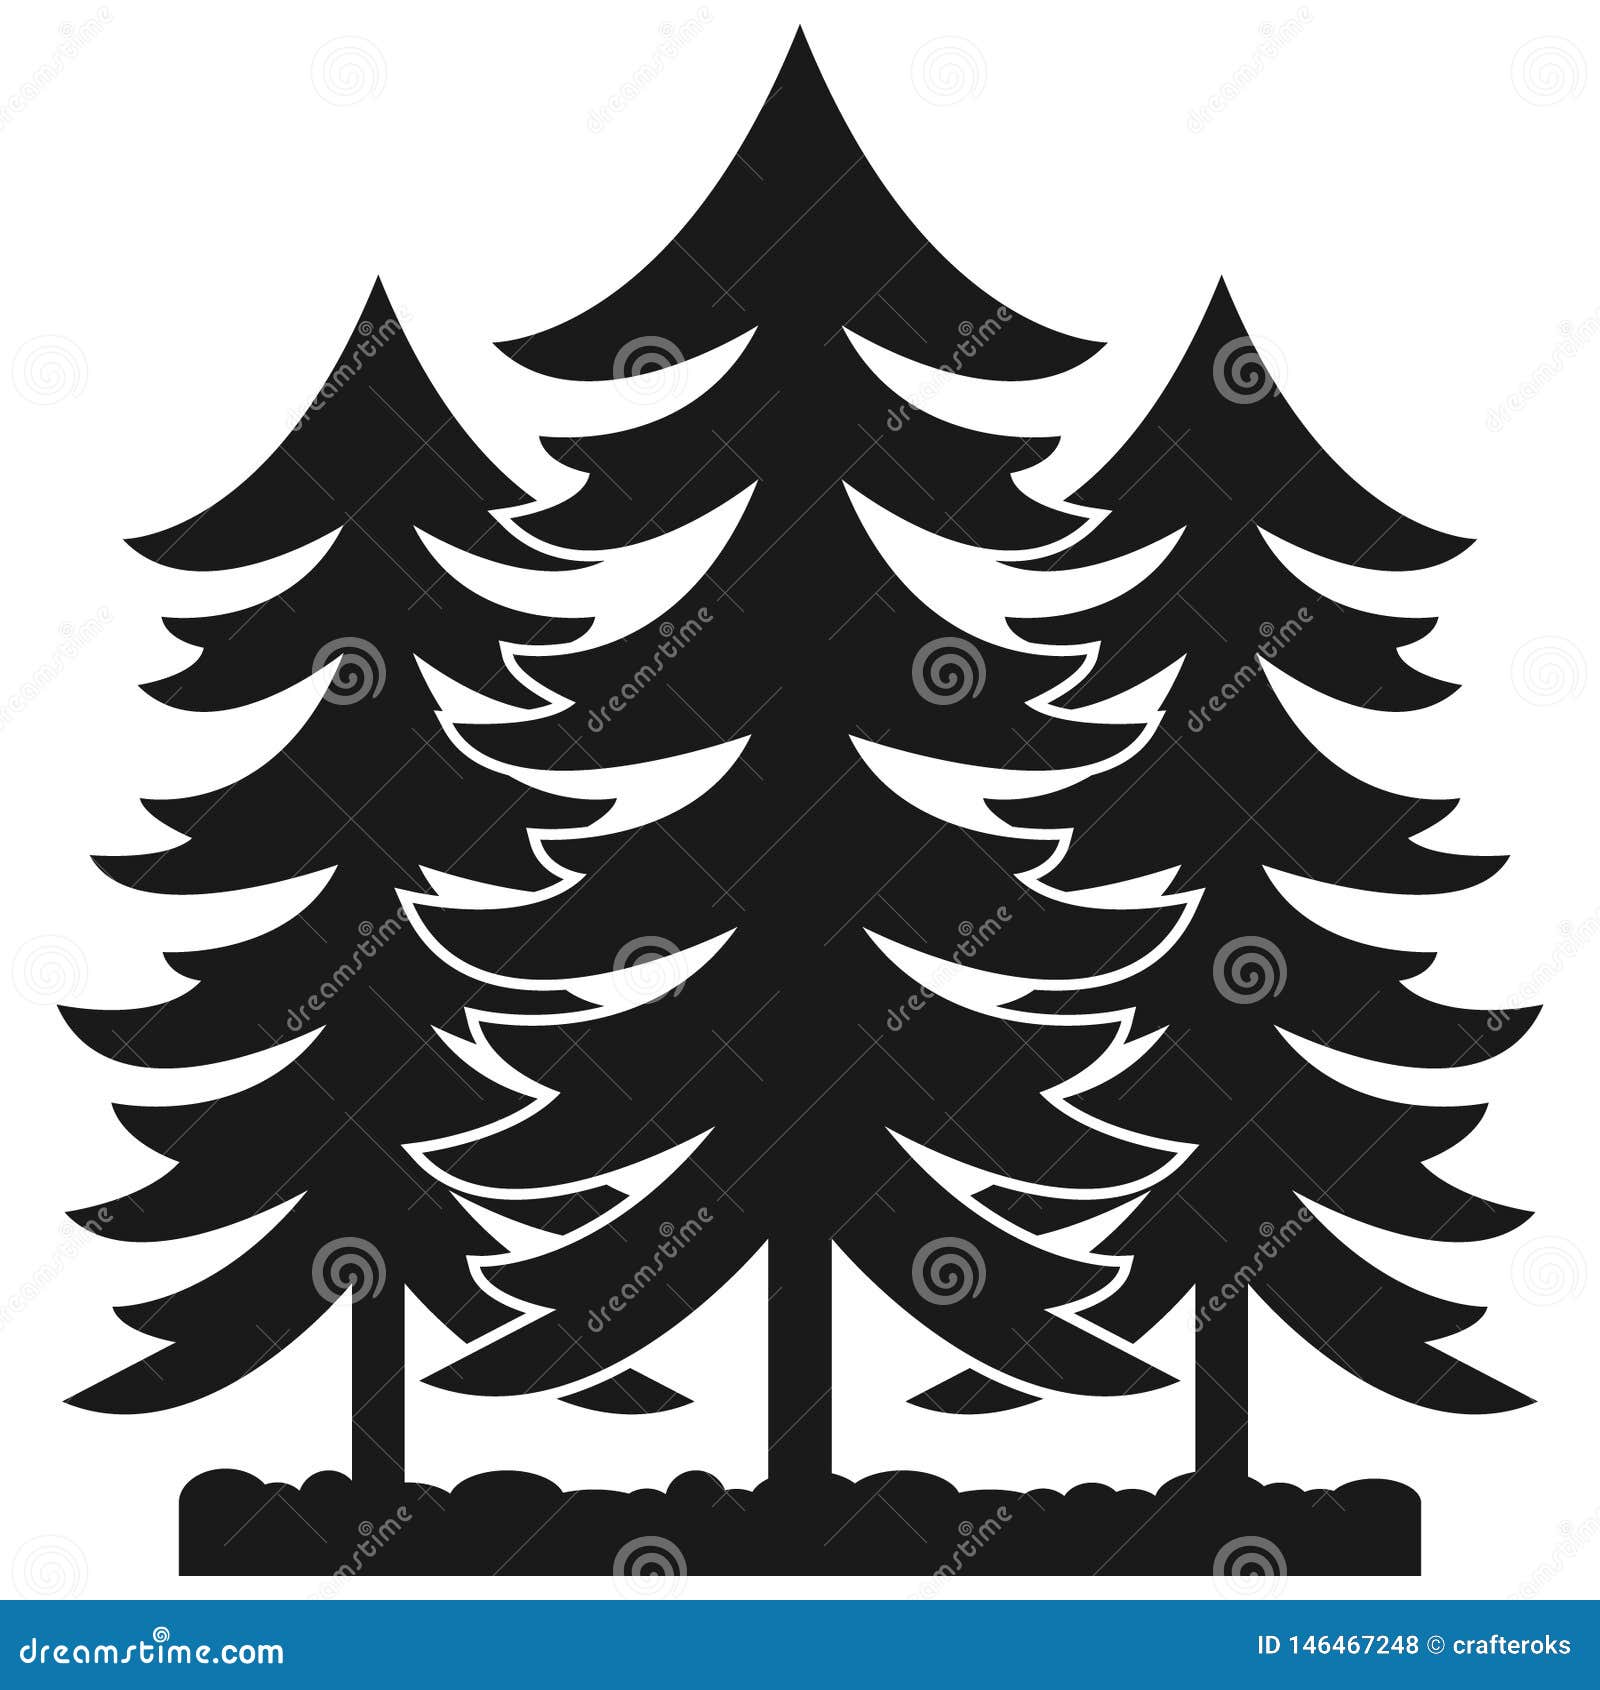 Download Forest Vector Epshand Drawn Crafteroks Svg Free Free Svg File Eps Dxf Vector Logo Silhouette Icon Instant Download Dig Stock Vector Illustration Of Cutting Hand 146467248 SVG, PNG, EPS, DXF File